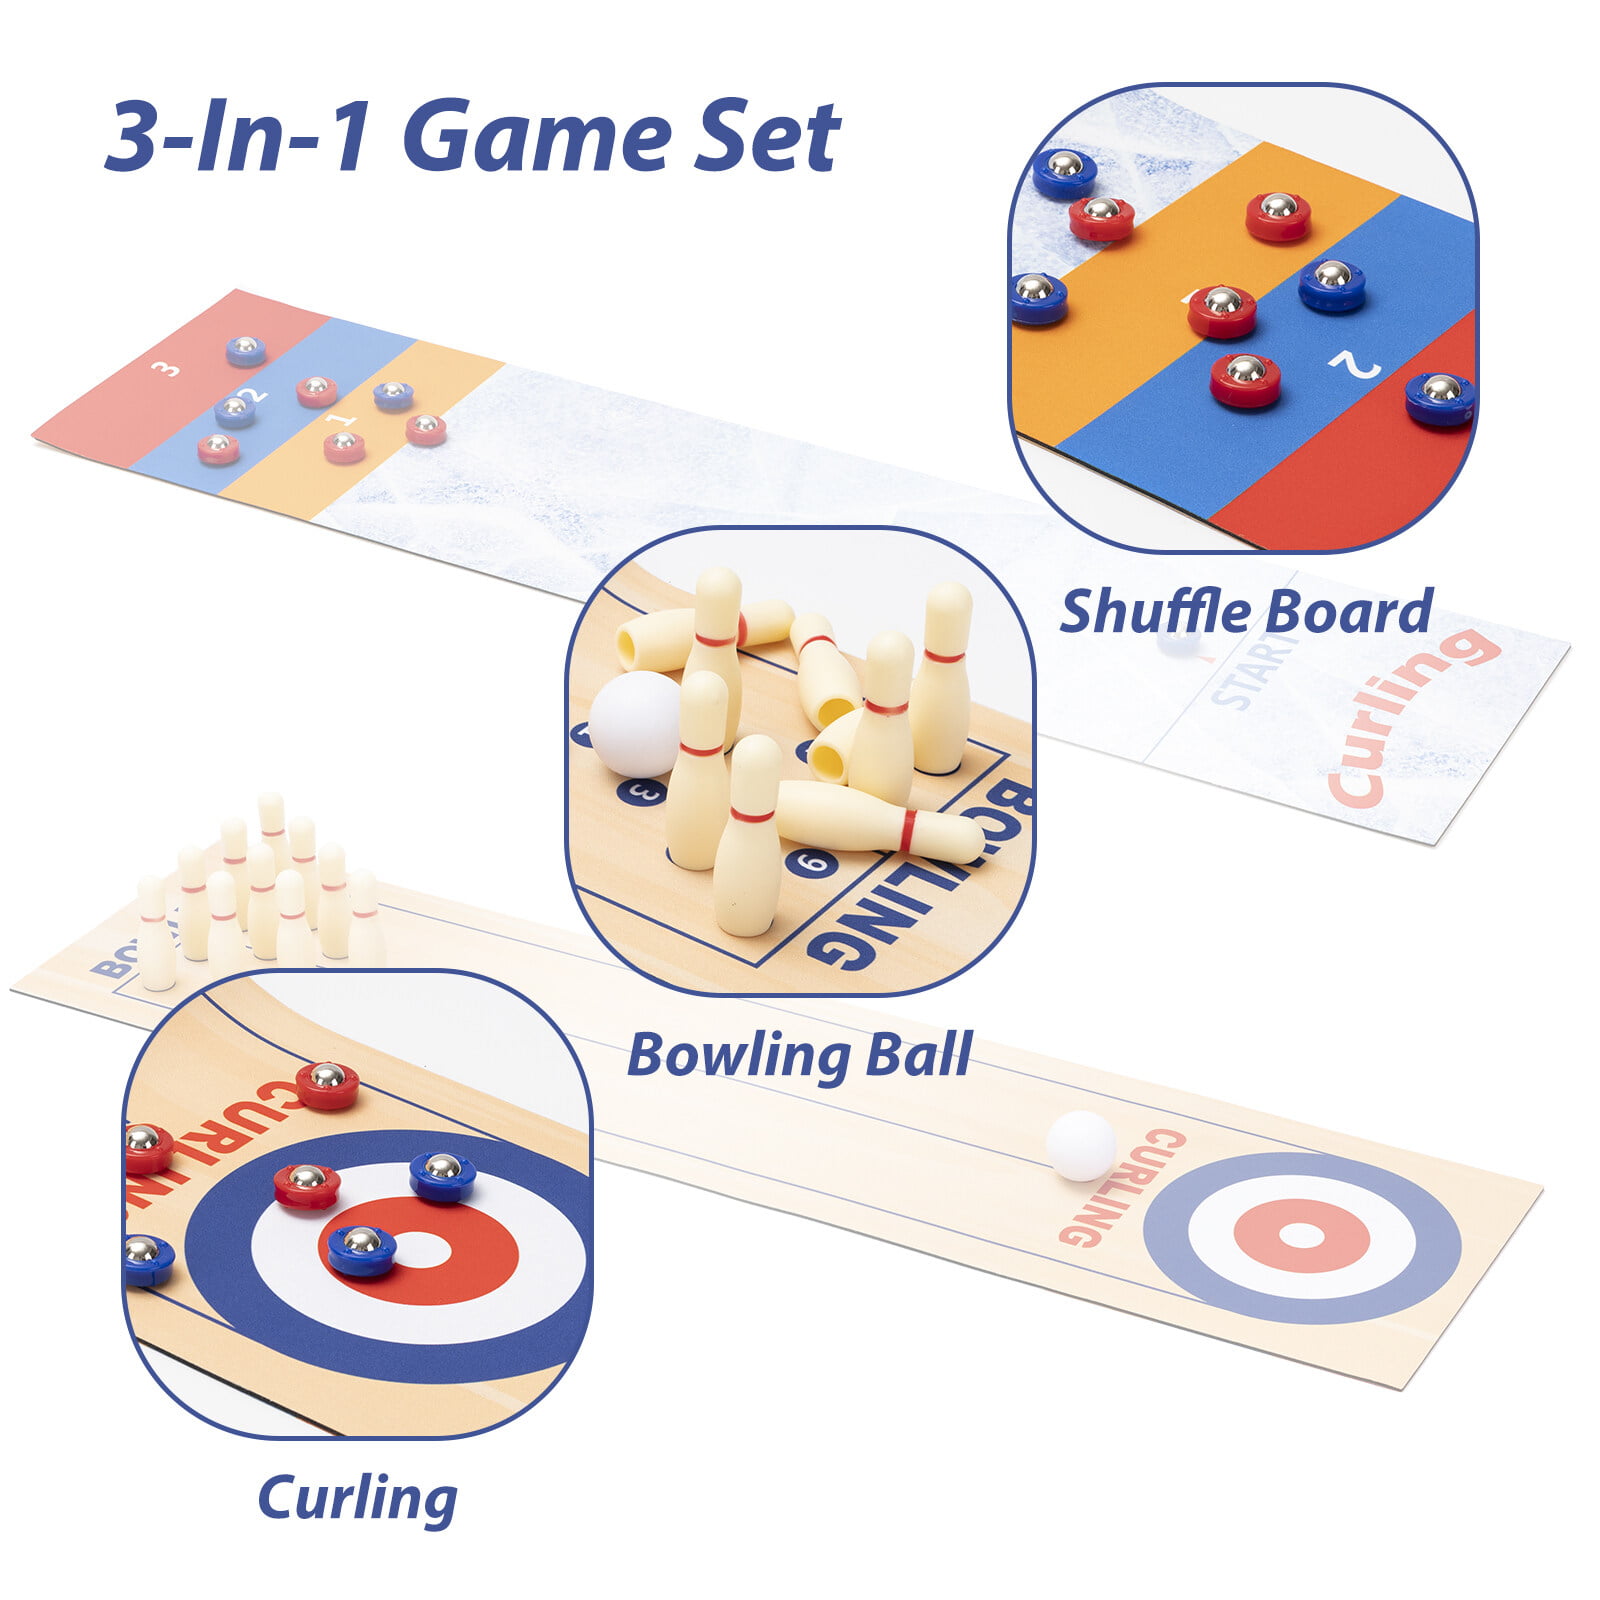 GOTHINK 3-in-1 Table Bowling Game - Mini Curling, Shuffleboard and Bowling  Set Perfect for Family Fun and Parties - Portable Mini Tabletop Games for